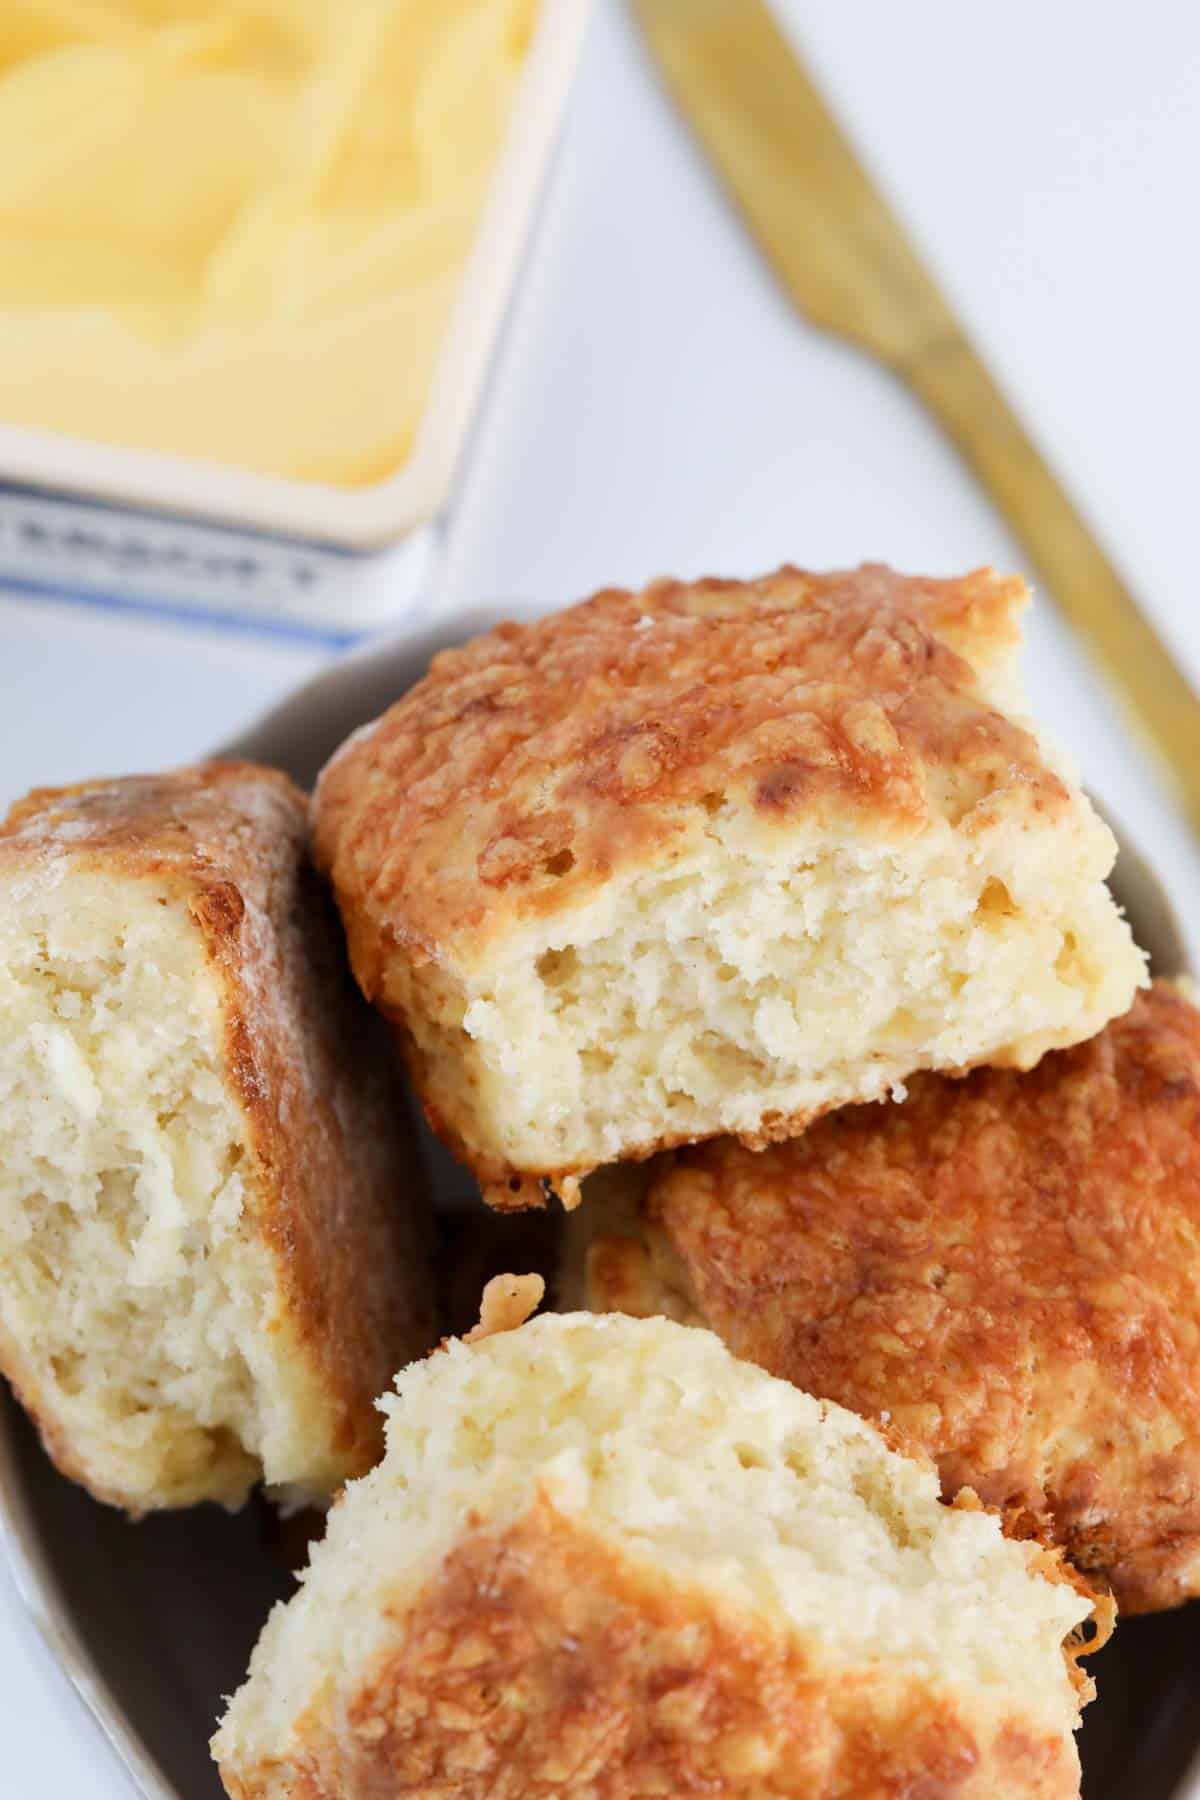 A batch of cheesy baked rolls in front of a tub of butter.